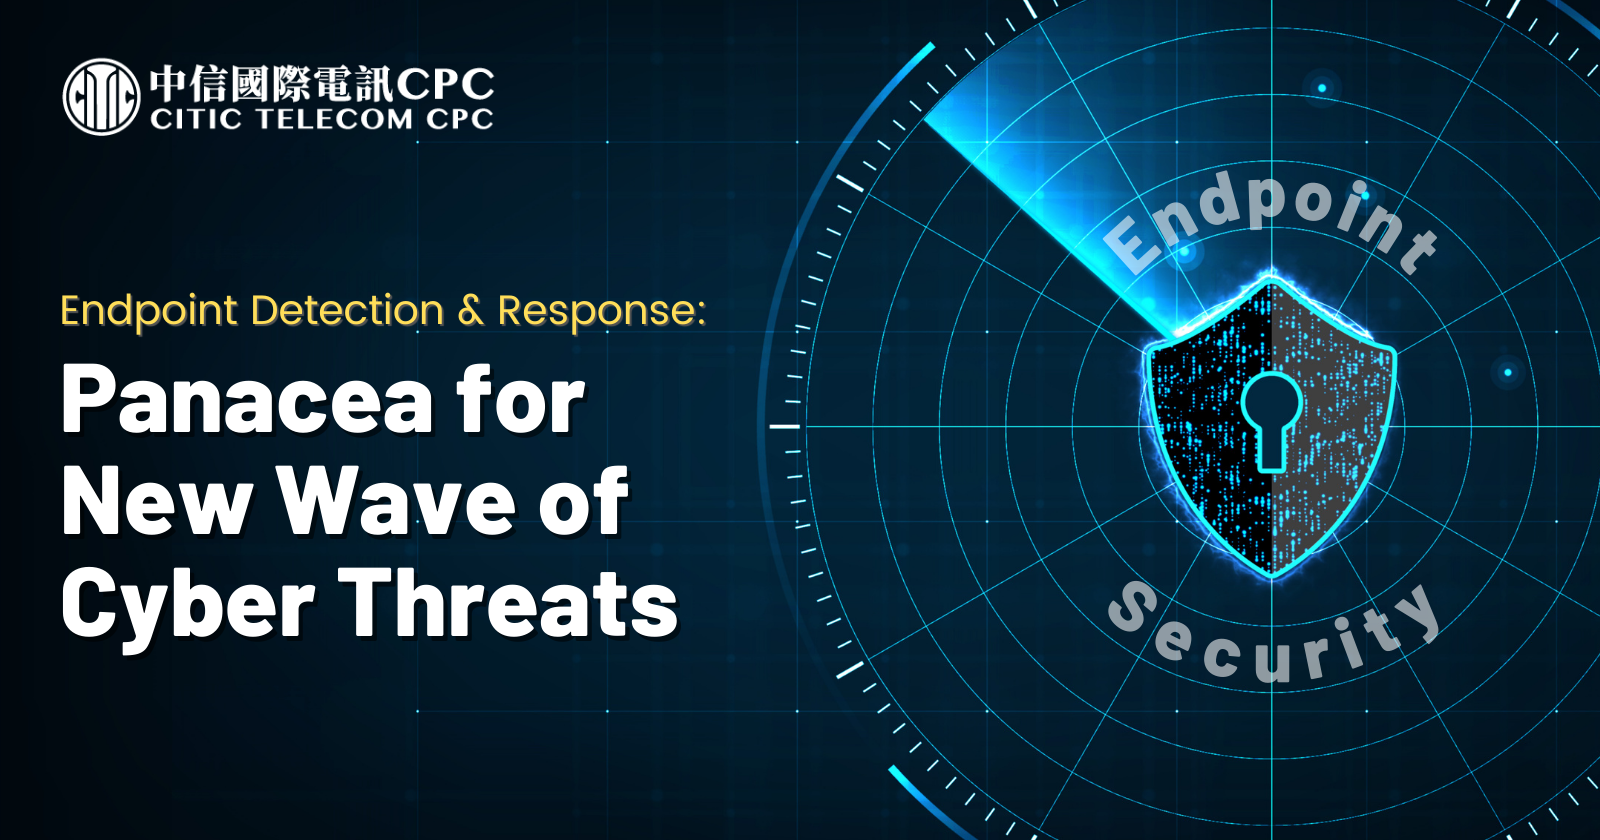 Endpoint Detection & Response: Panacea for New Wave of Cyber Threats 